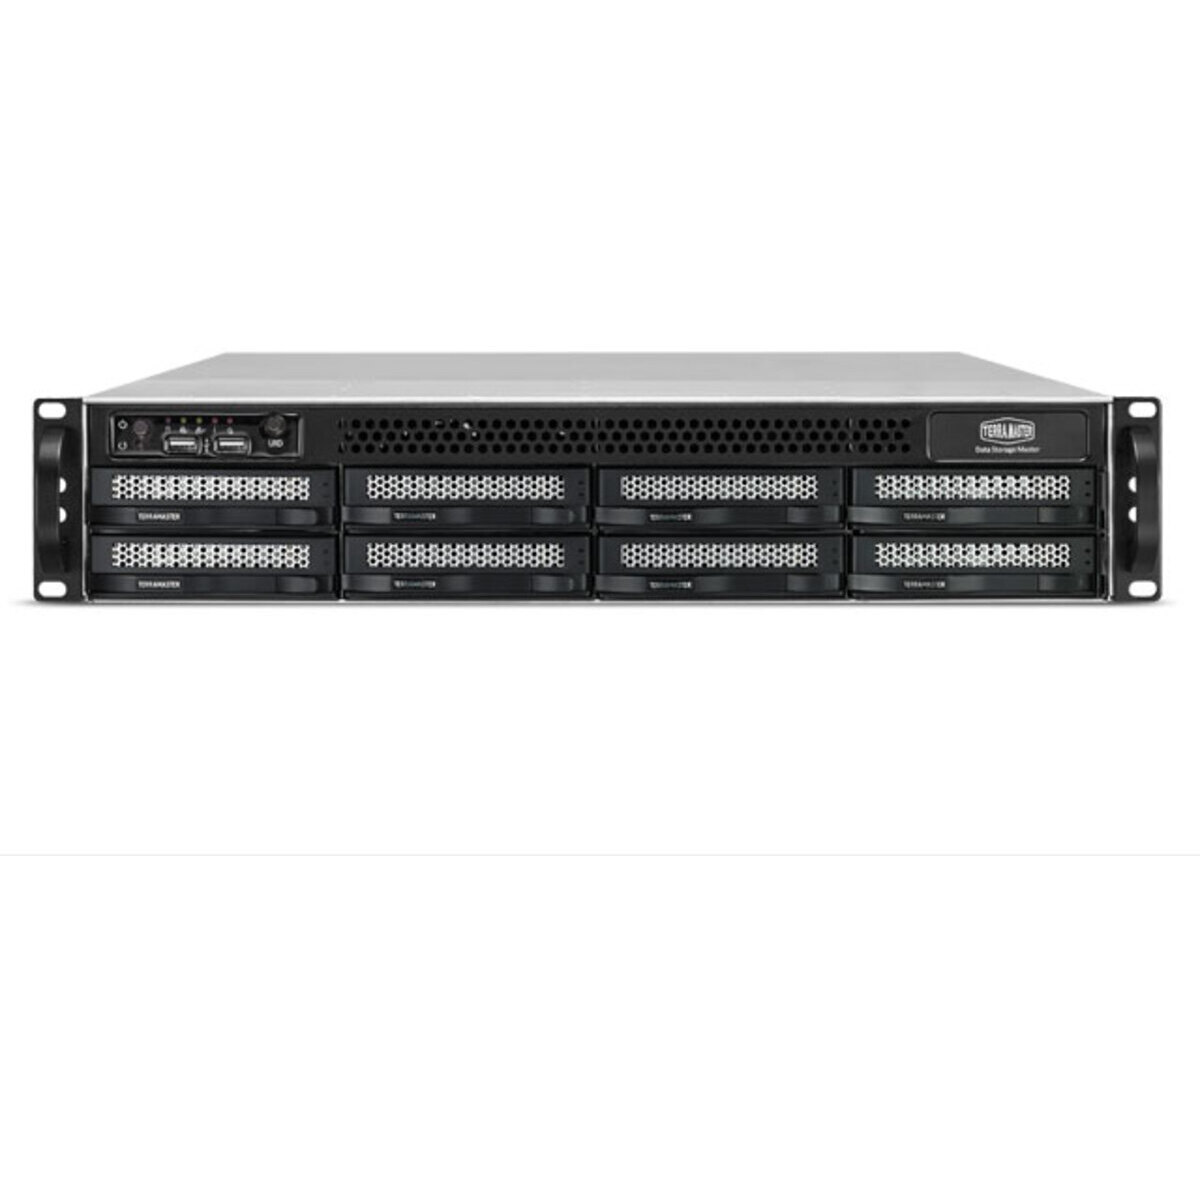 TerraMaster U8-522-9400 64tb 8-Bay RackMount Large Business / Enterprise NAS - Network Attached Storage Device 4x16tb Seagate EXOS X18 ST16000NM000J 3.5 7200rpm SATA 6Gb/s HDD ENTERPRISE Class Drives Installed - Burn-In Tested U8-522-9400